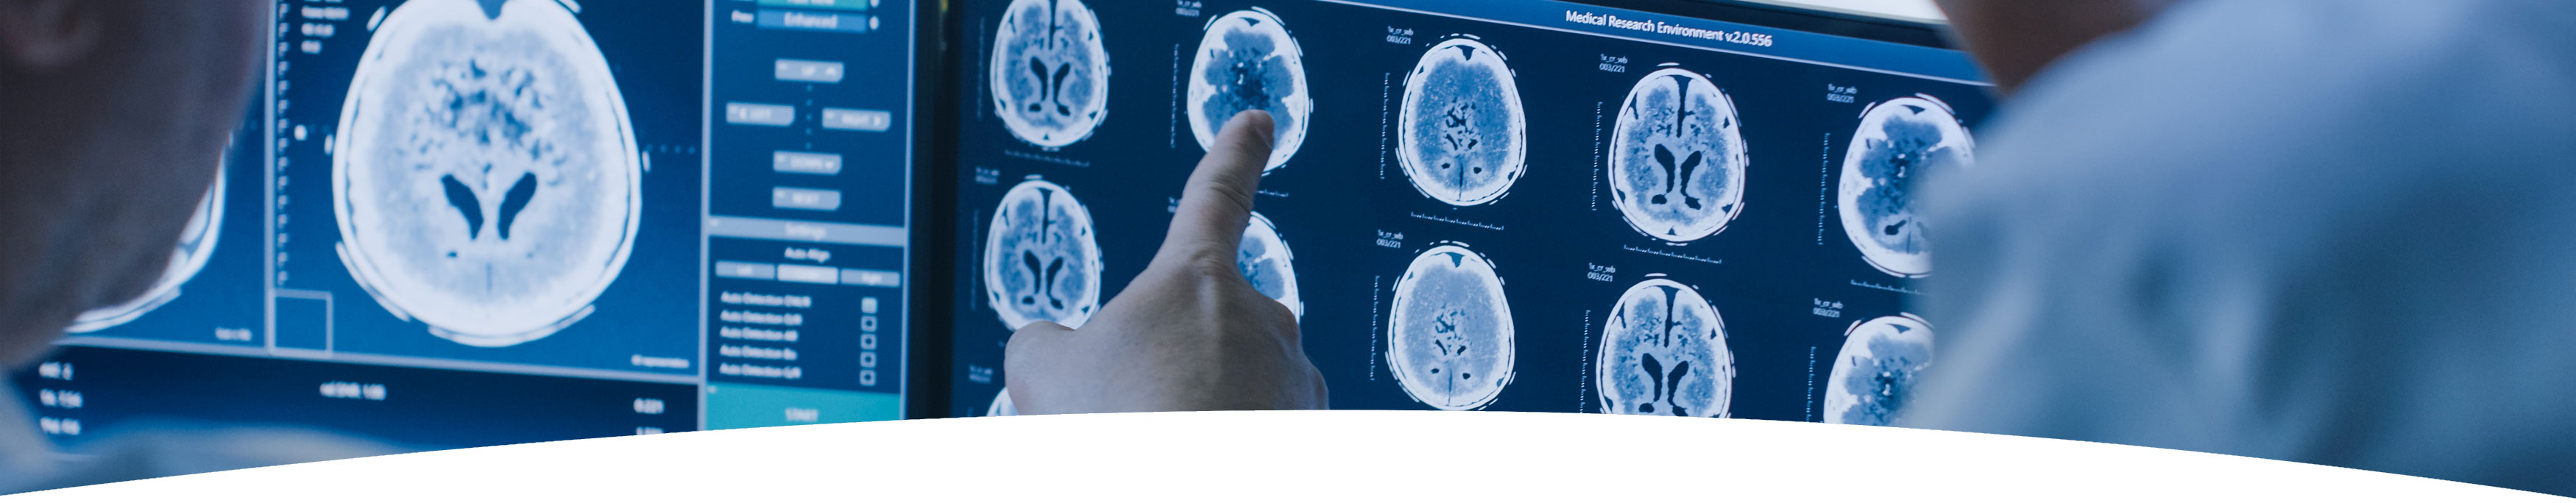 Banner picture of a man pointing at an MRI image of the brain.